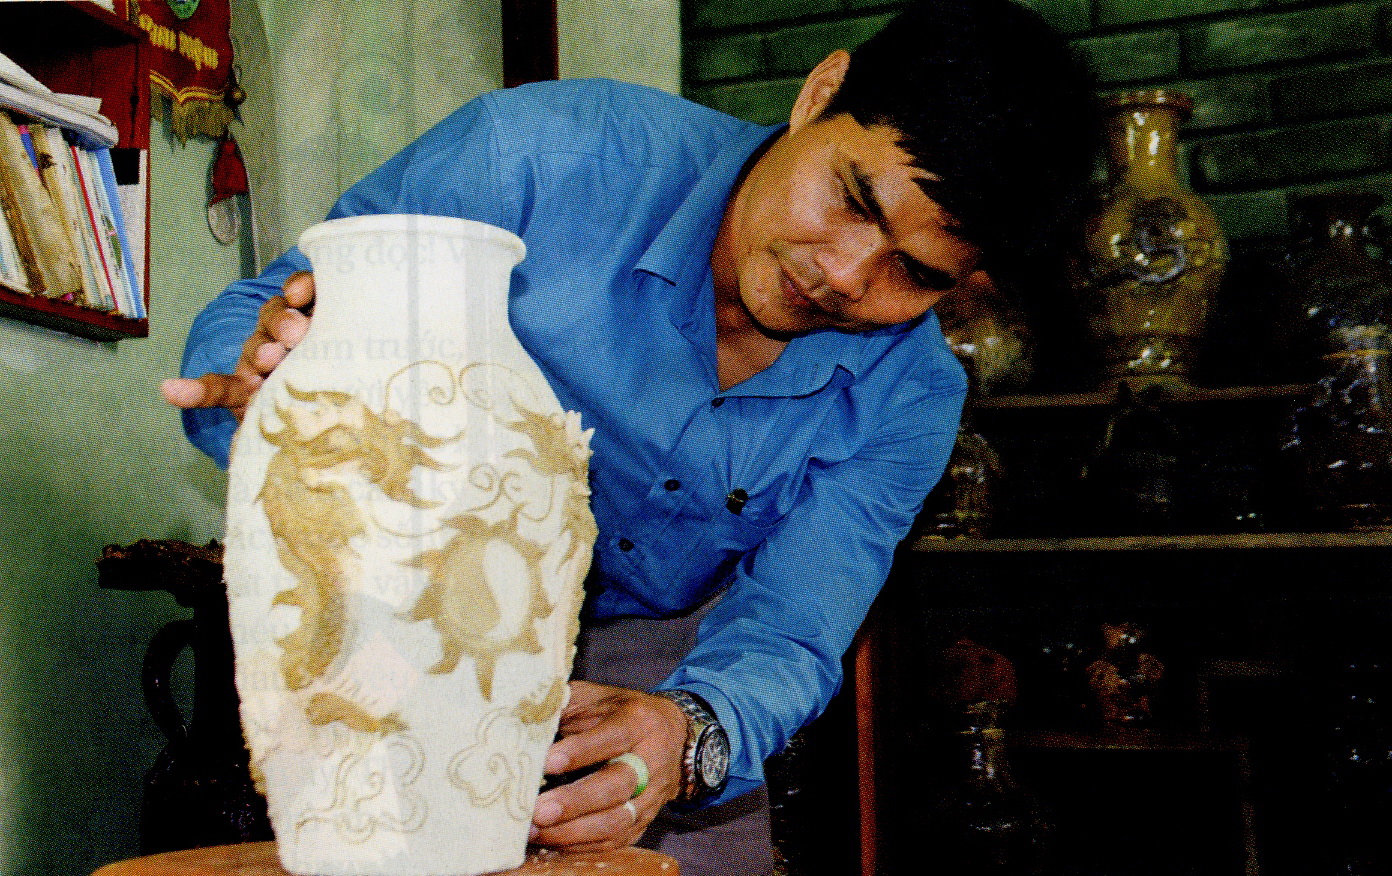 Artisans fight to preserve traditional pottery in central Vietnam